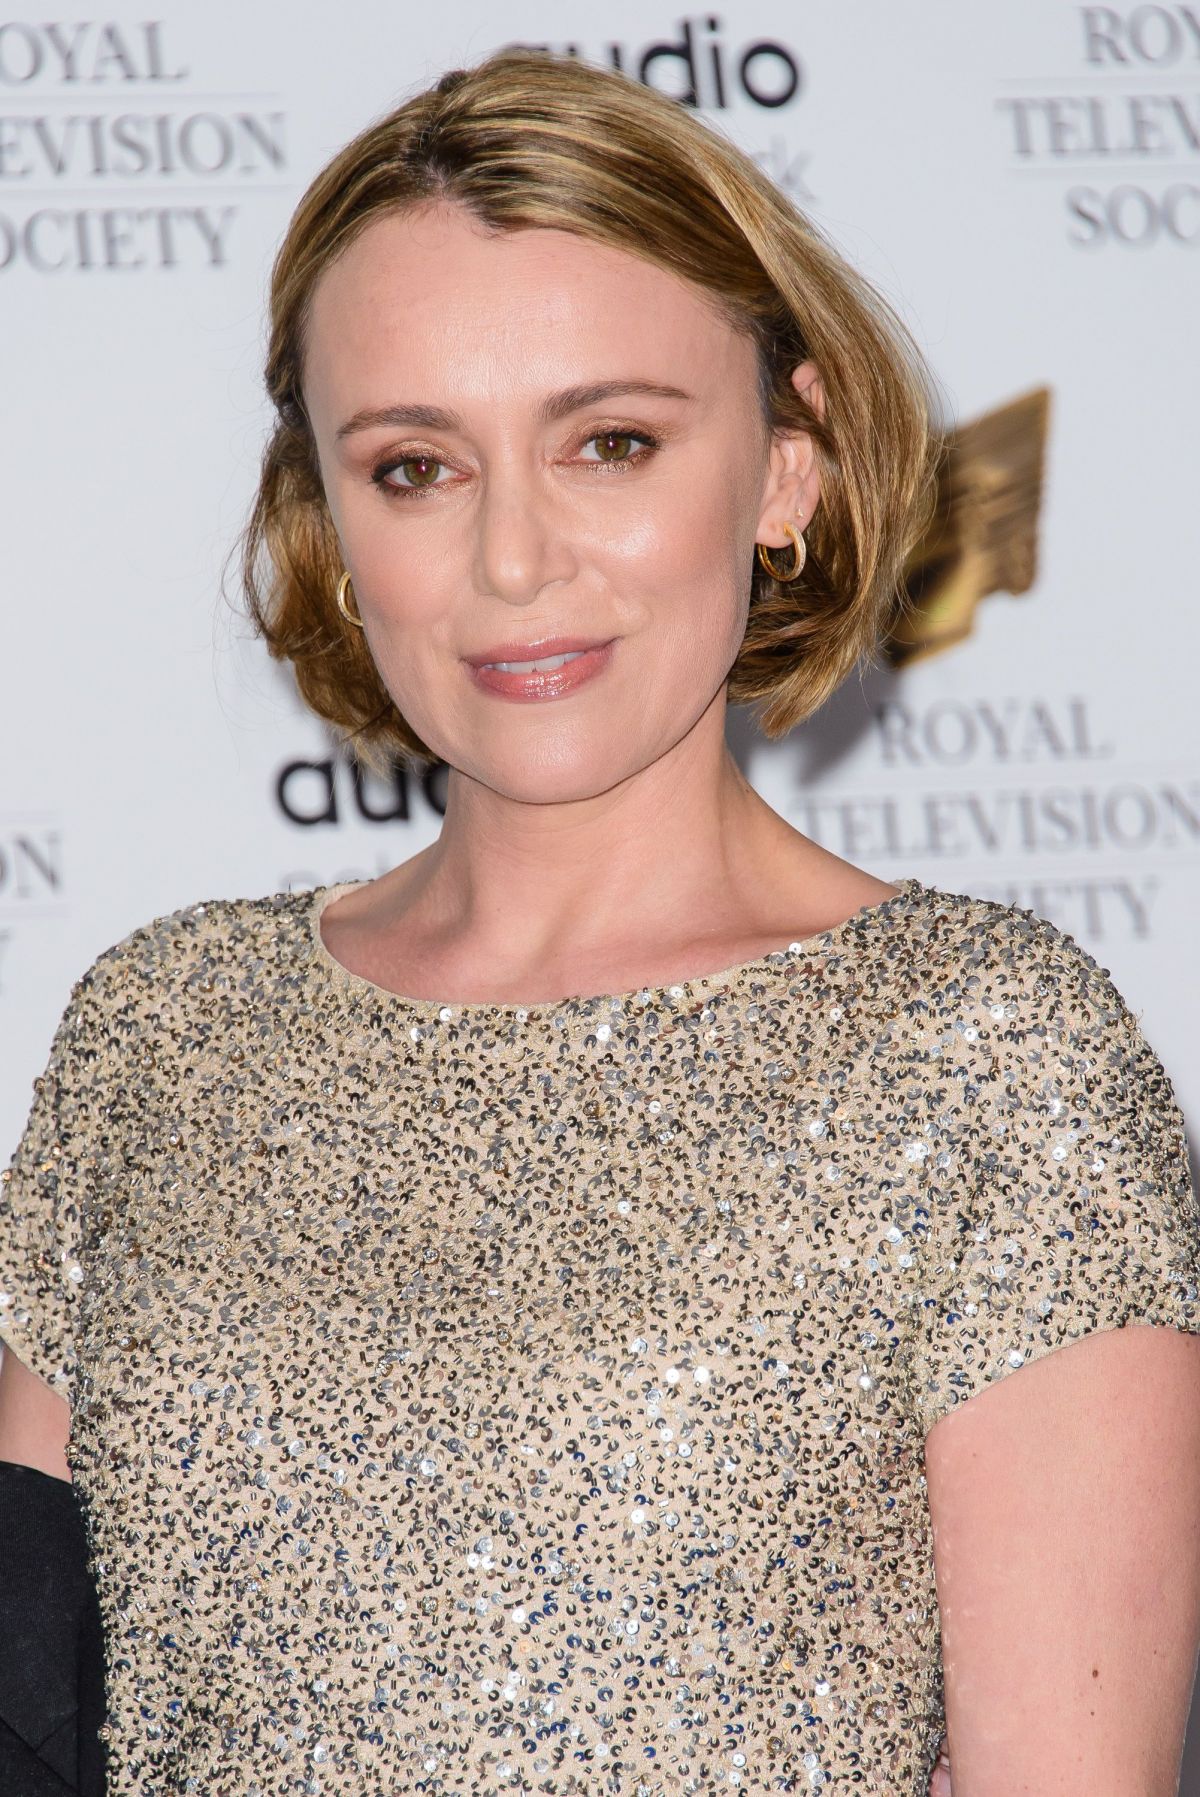 Keeley Hawes At Royal Television Society Programme Awards Free Download Nude Photo Gallery 1479